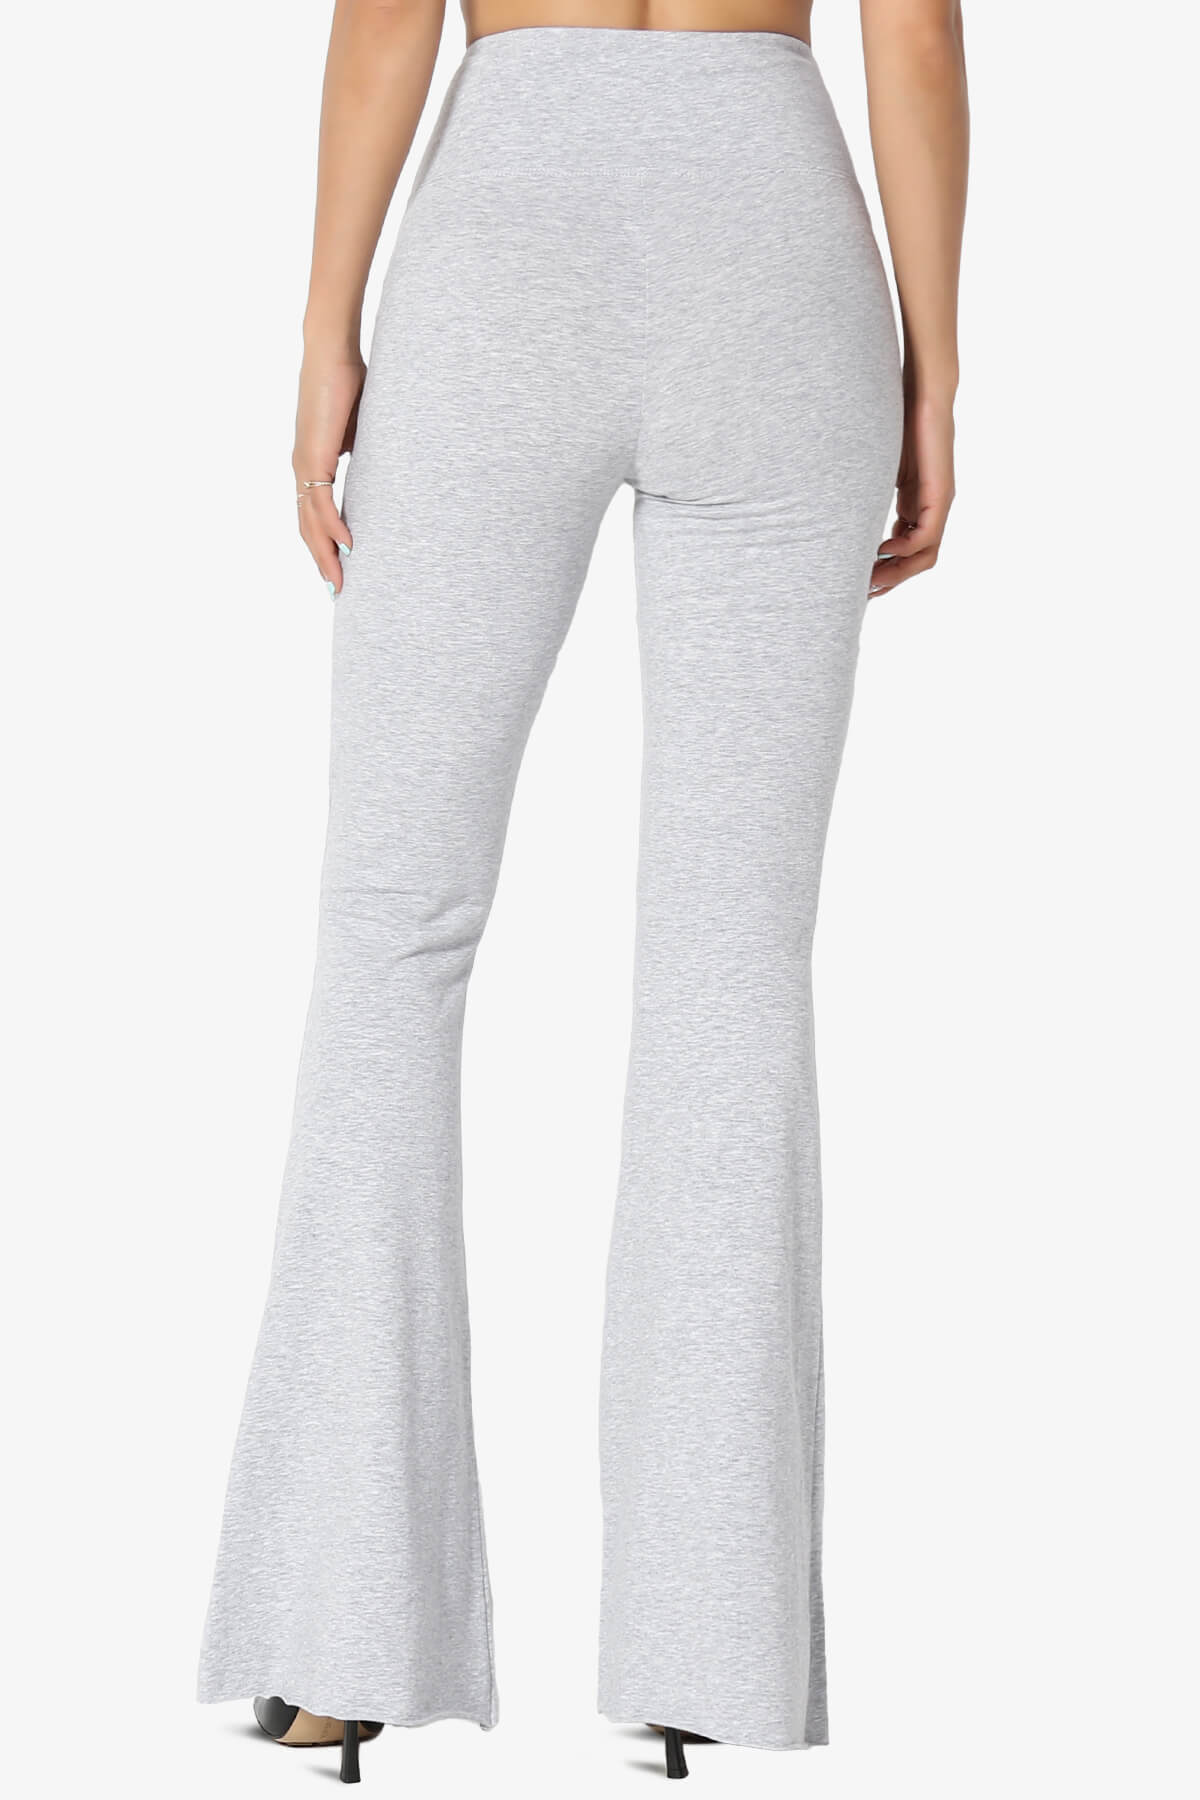 Load image into Gallery viewer, Zaylee Raw Hem Flared Comfy Yoga Pants HEATHER GREY_2
